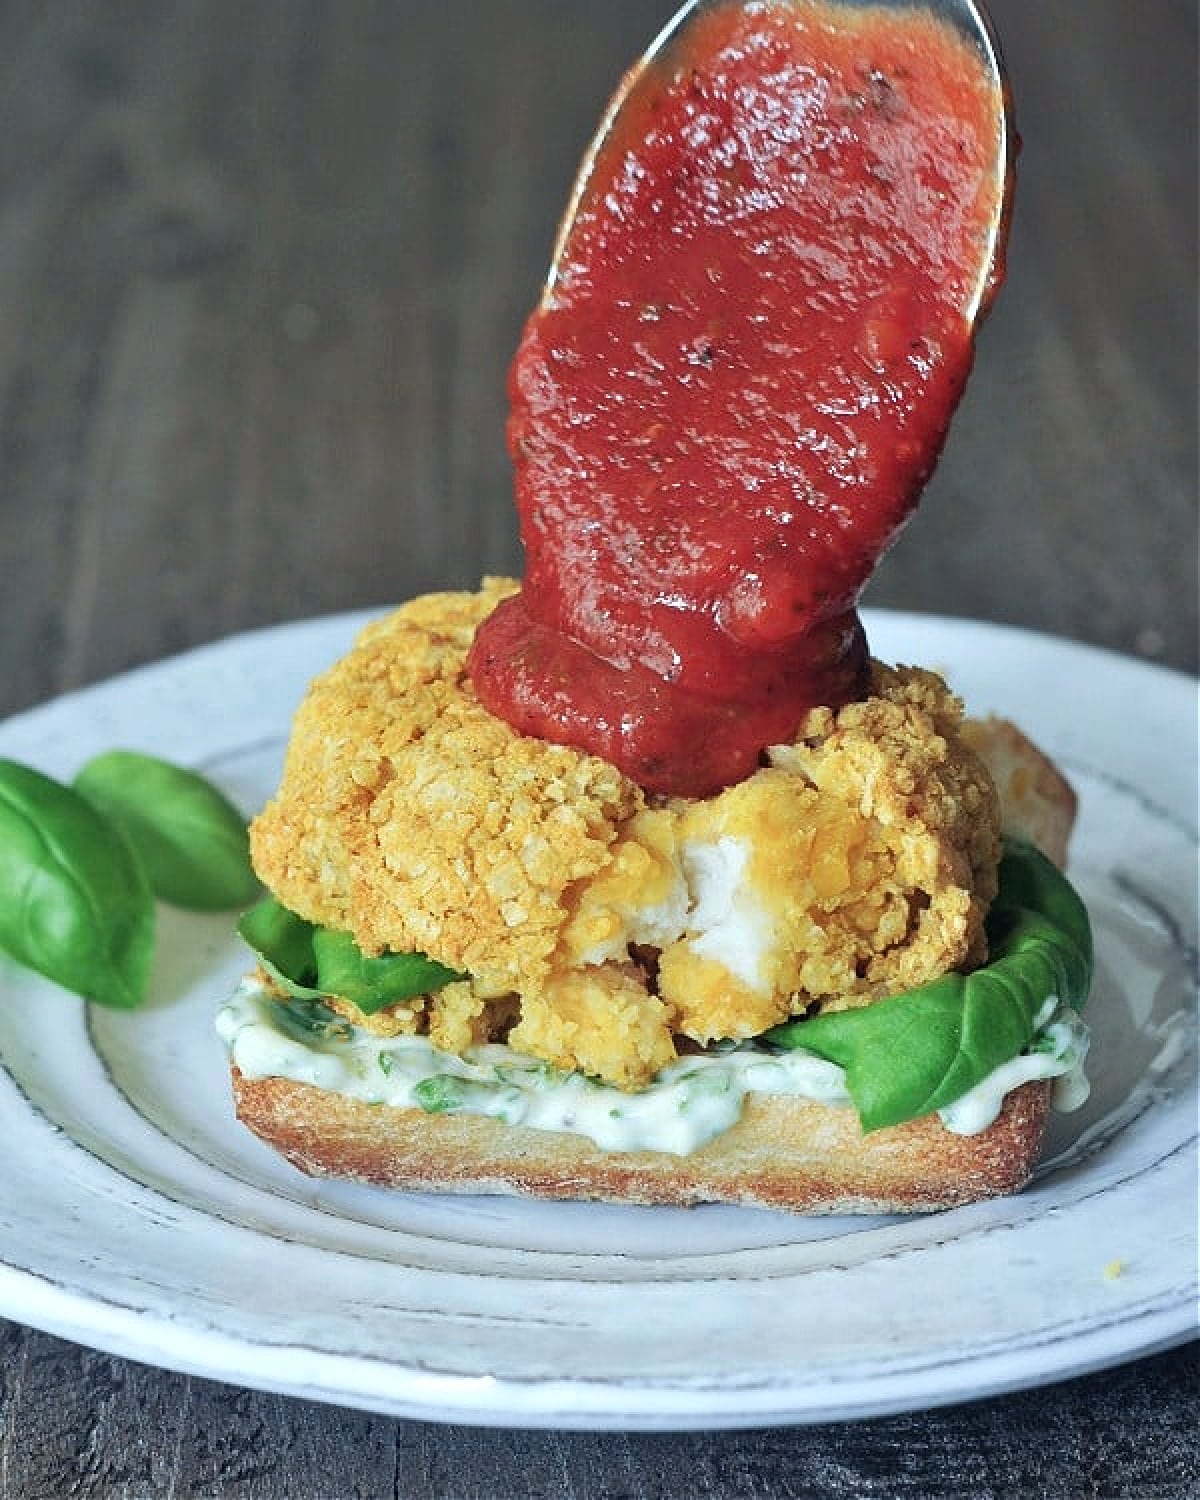 Marinara sauce is being spooned over a vegan chicken burger patty on a bottom bun with basil aioli and fresh basil leaves.